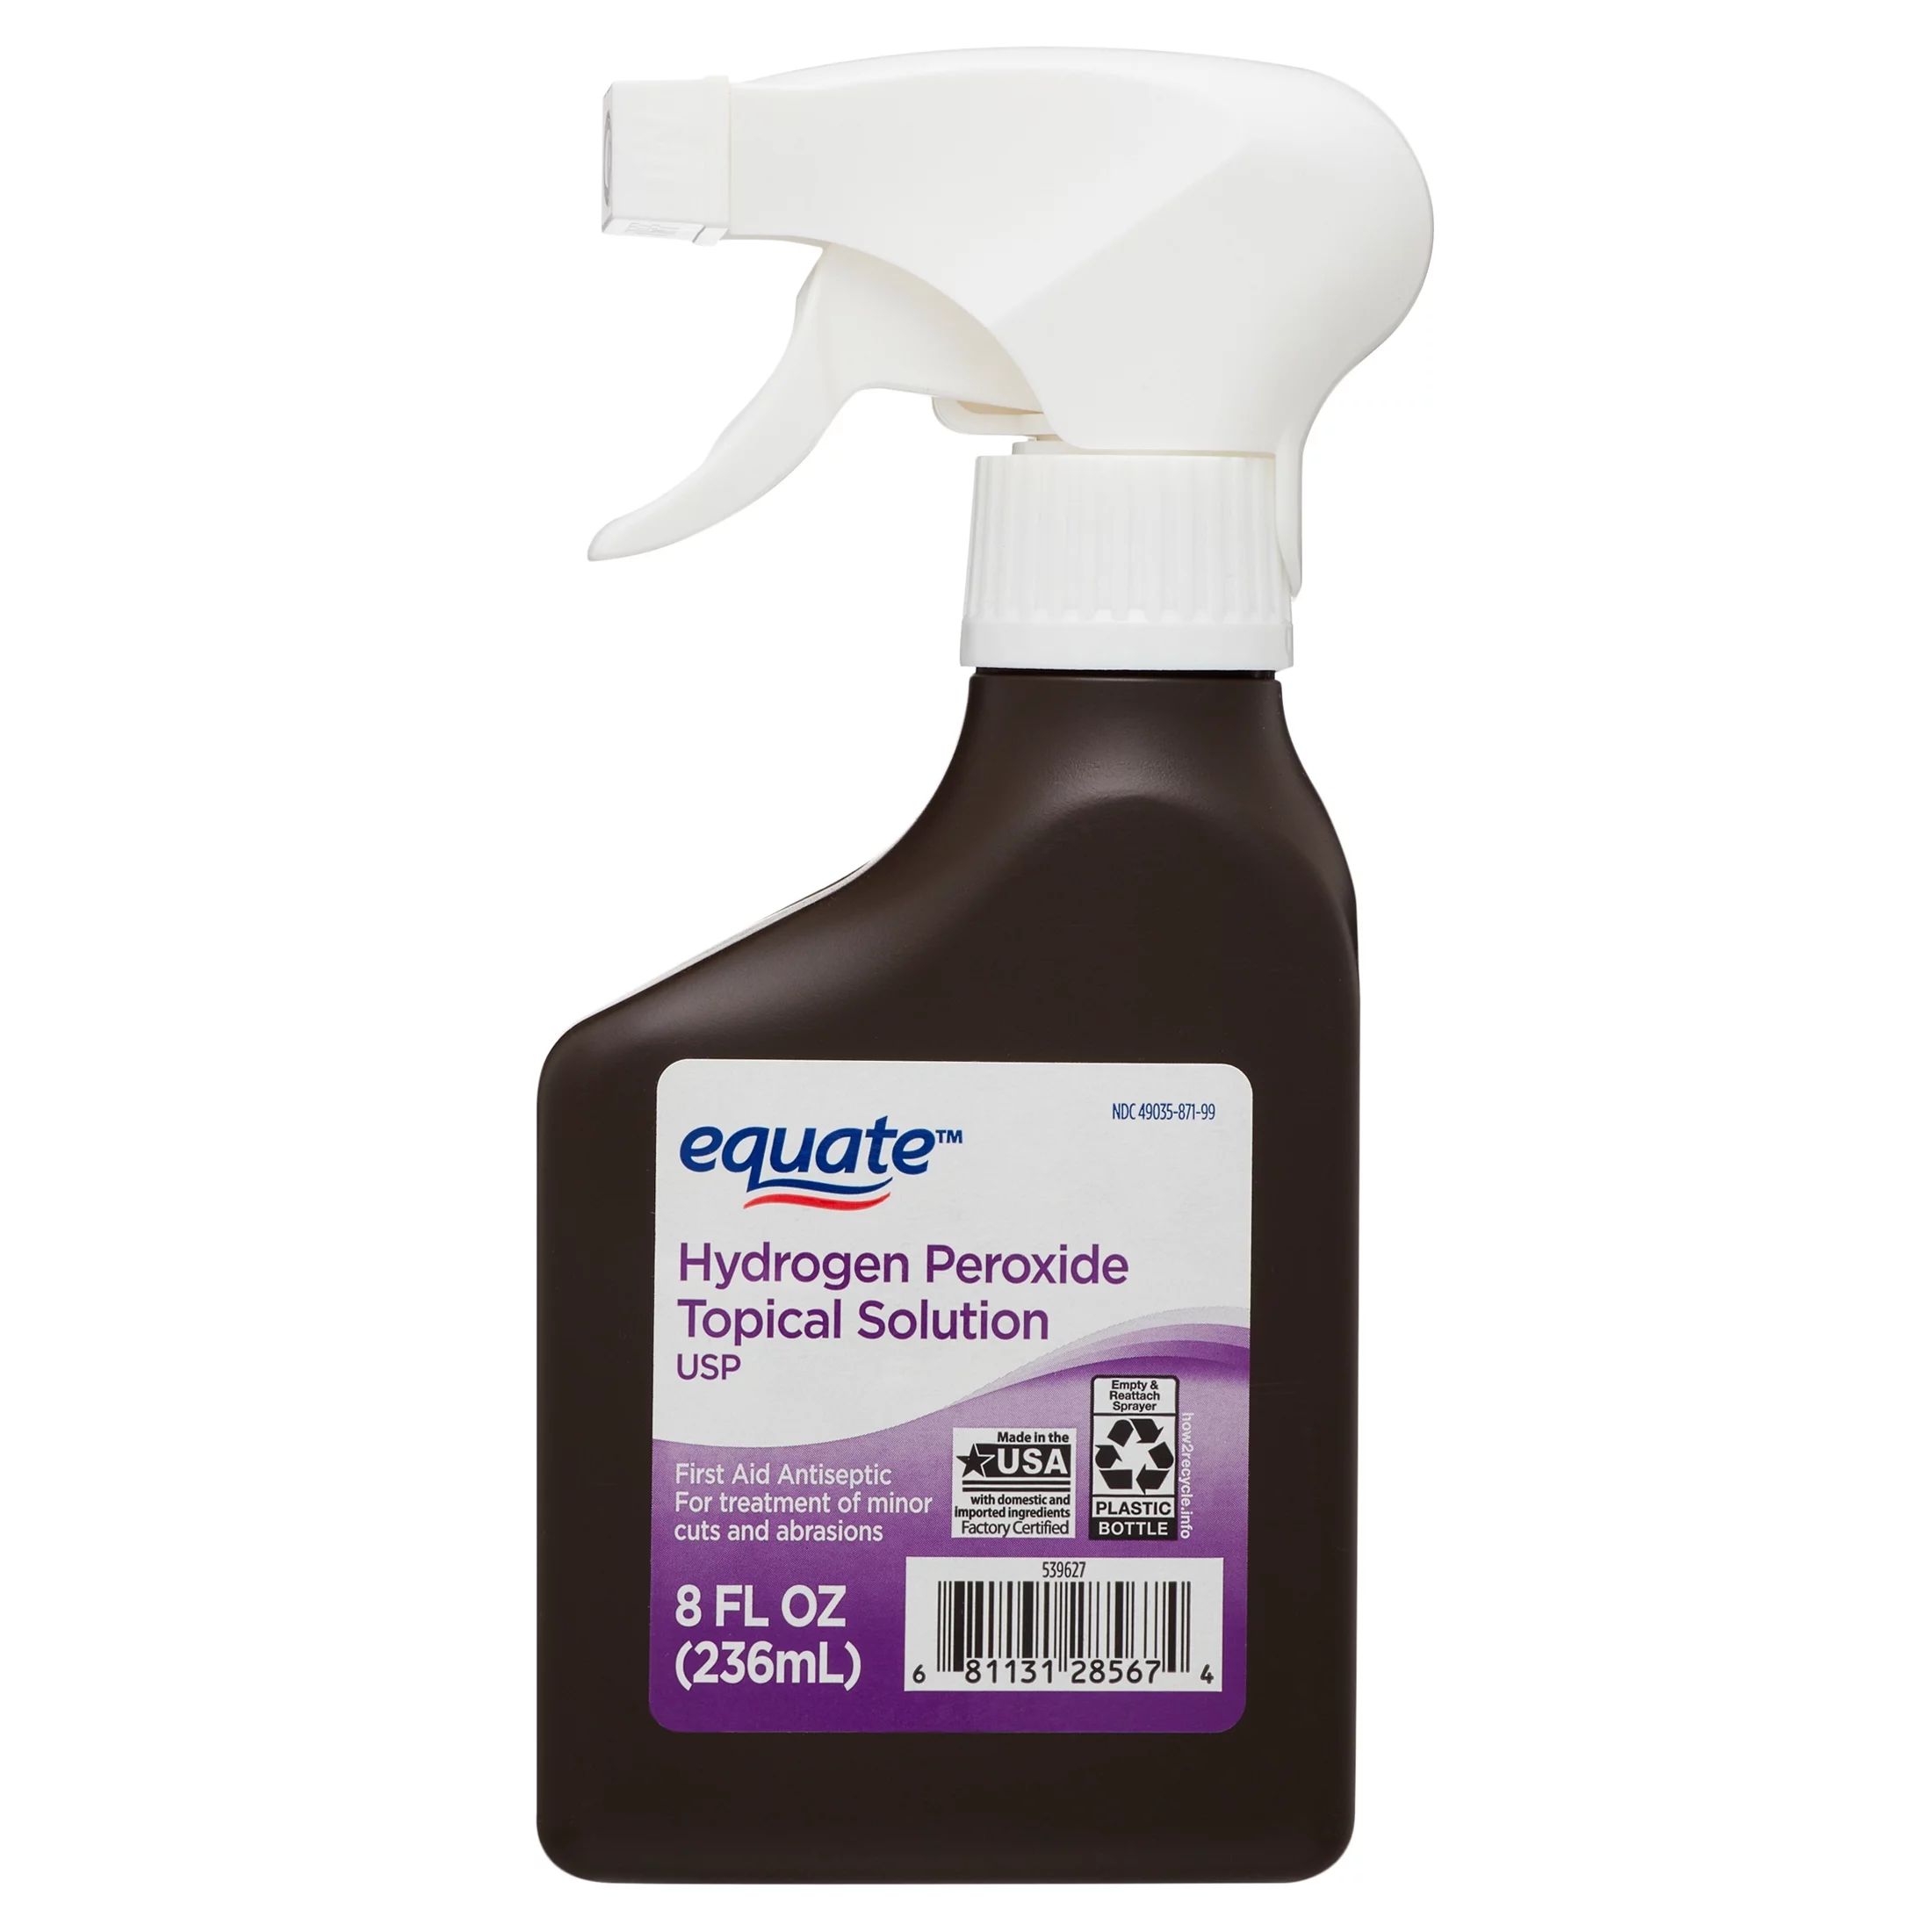 Equate 3% Hydrogen Peroxide Topical Solution Antiseptic Spray, 8 fl oz | Walmart (US)